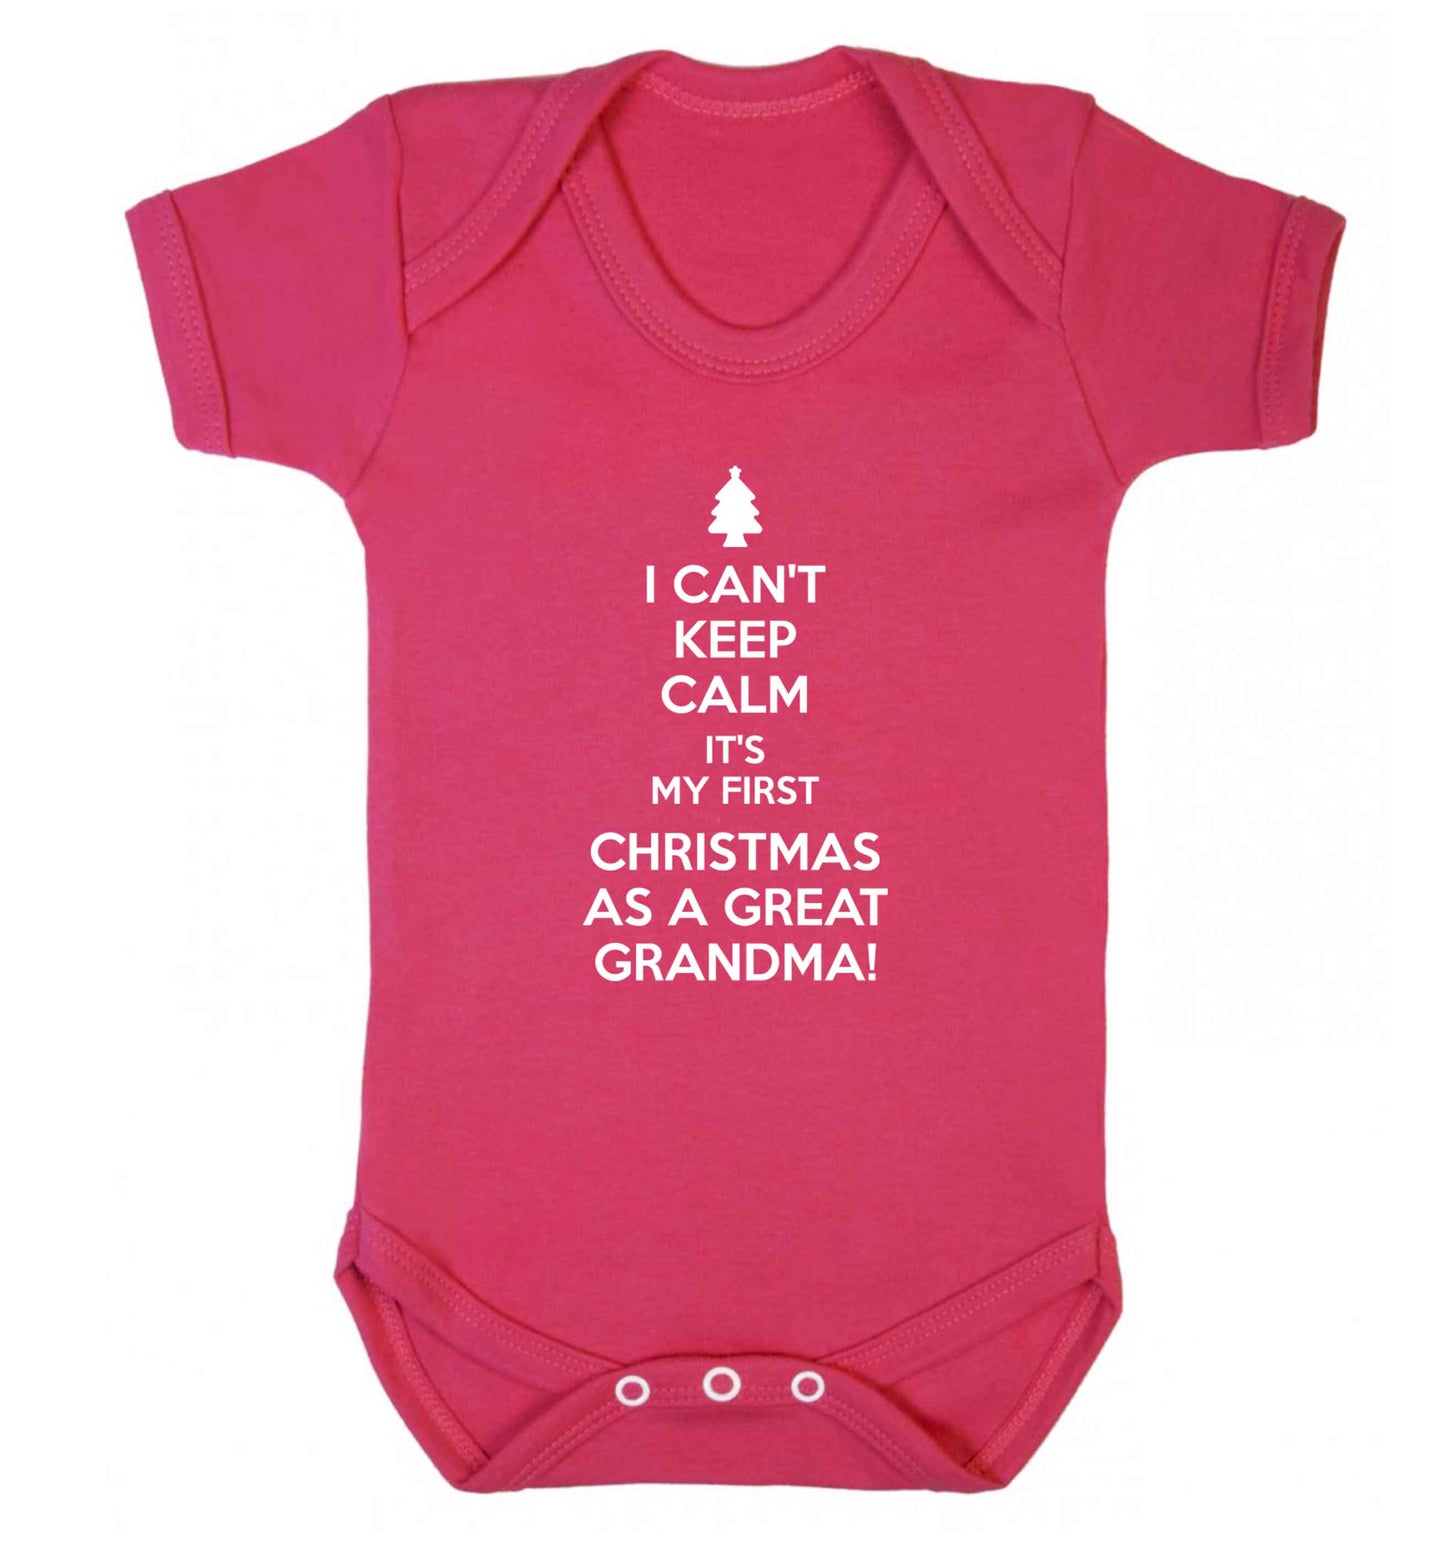 I can't keep calm it's my first Christmas as a great grandma! Baby Vest dark pink 18-24 months